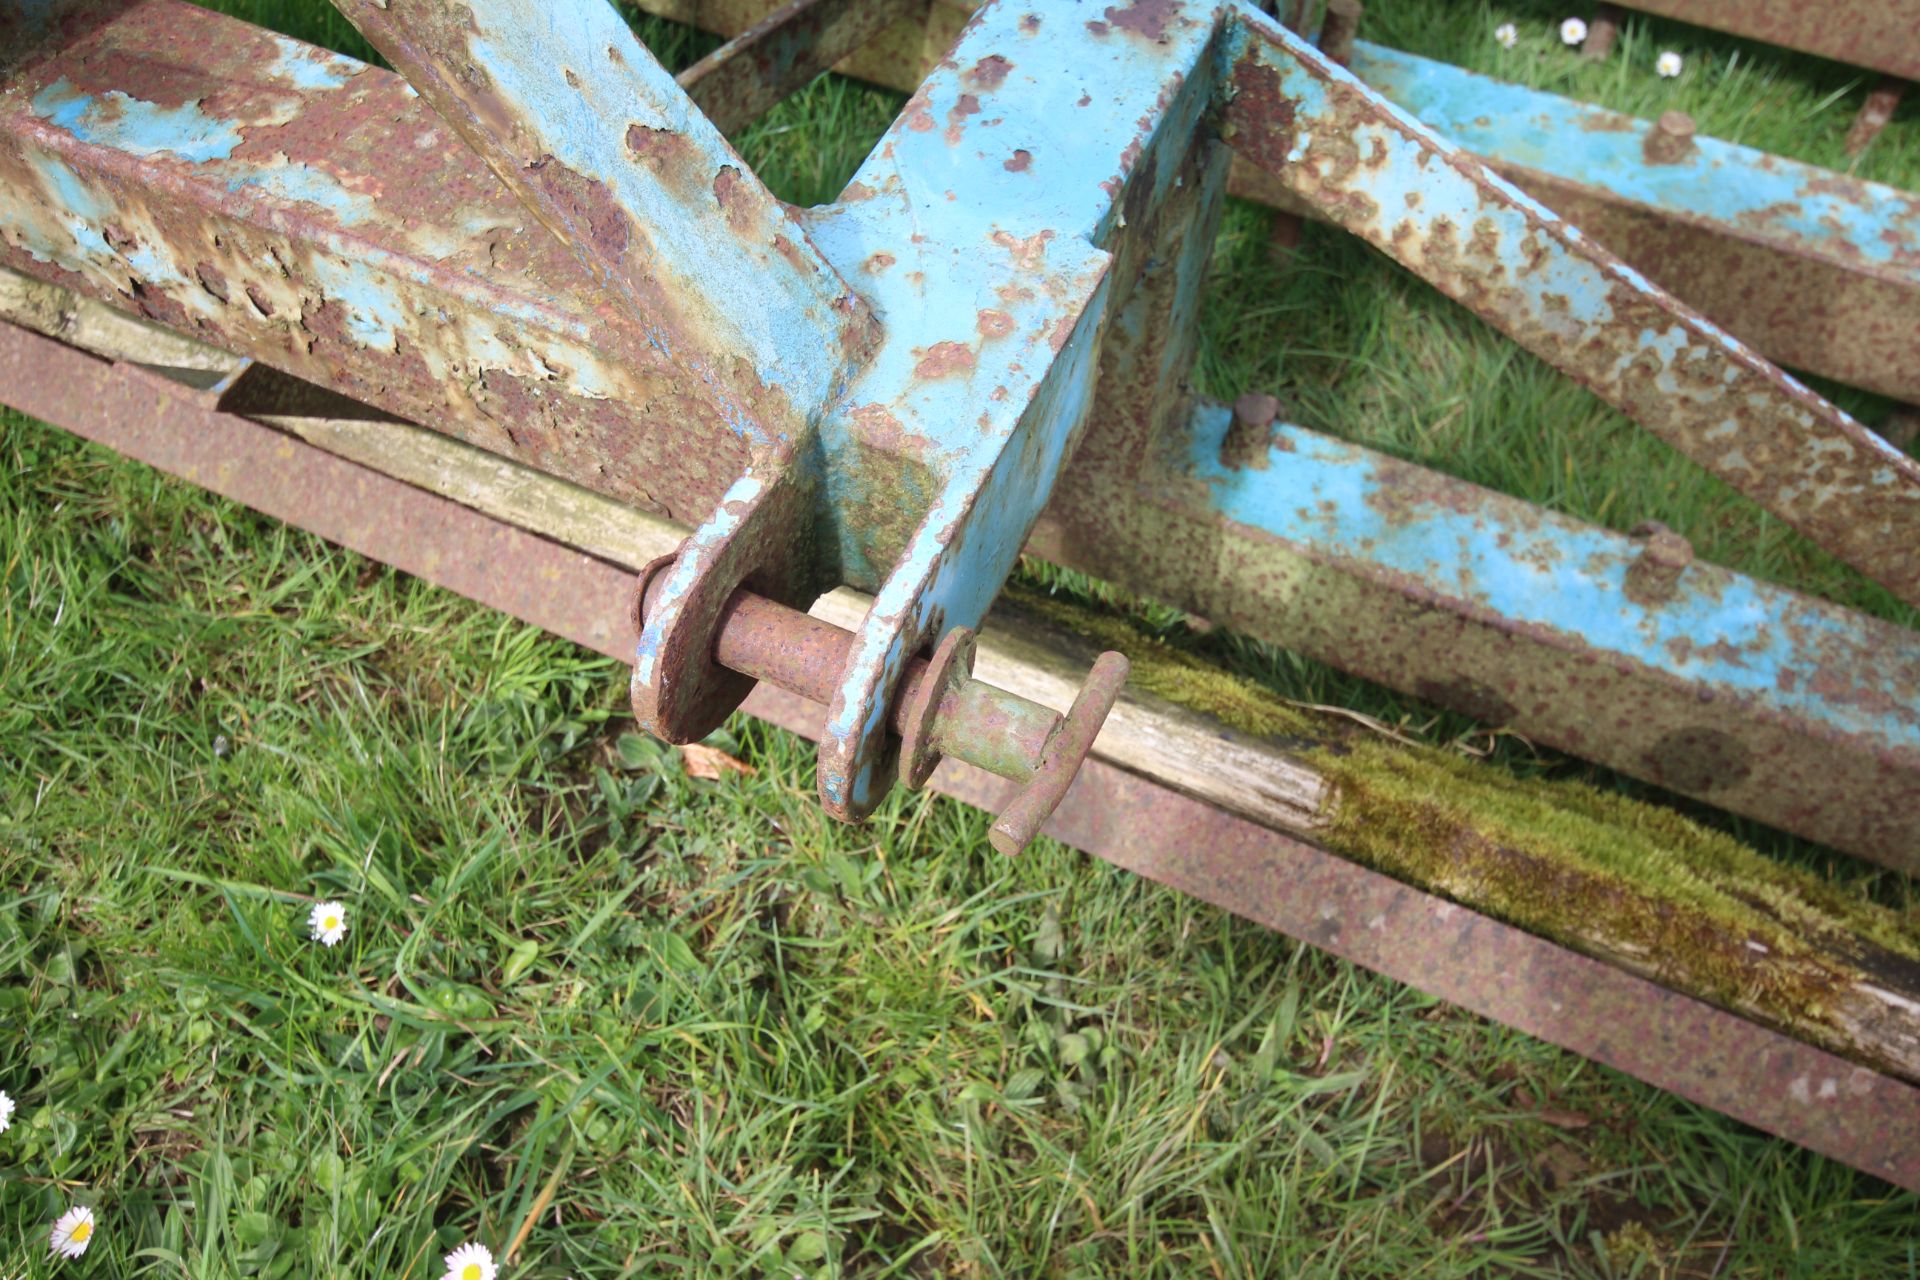 A W Smith & Sons Dutch harrow. For sale due to retirement. V - Image 6 of 12